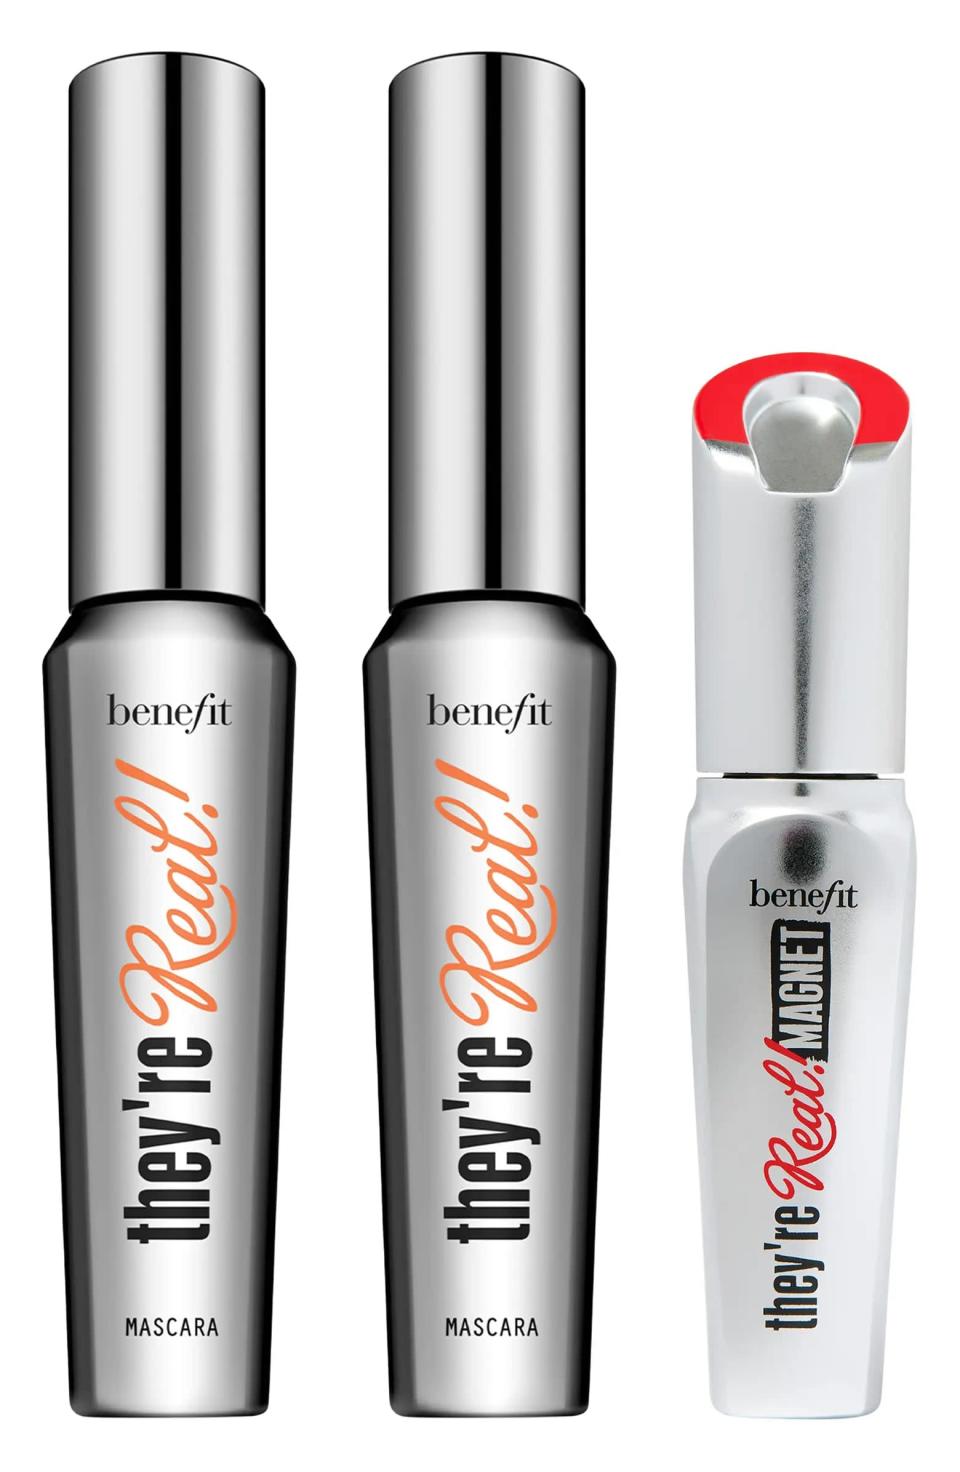 <p>Need to stock up on mascara? The <span>Benefit Cosmetics Mascara Set</span> ($35, $69 value) contains two full sizes of the bestselling They're Real! mascaras and a travel size of the They're Real! Magnet Extreme Lengthening Mascara. Each one will bring length and volume to your lashes for a lifted, fluttery look. Both of the formulas are long wearing and won't smudge. </p>